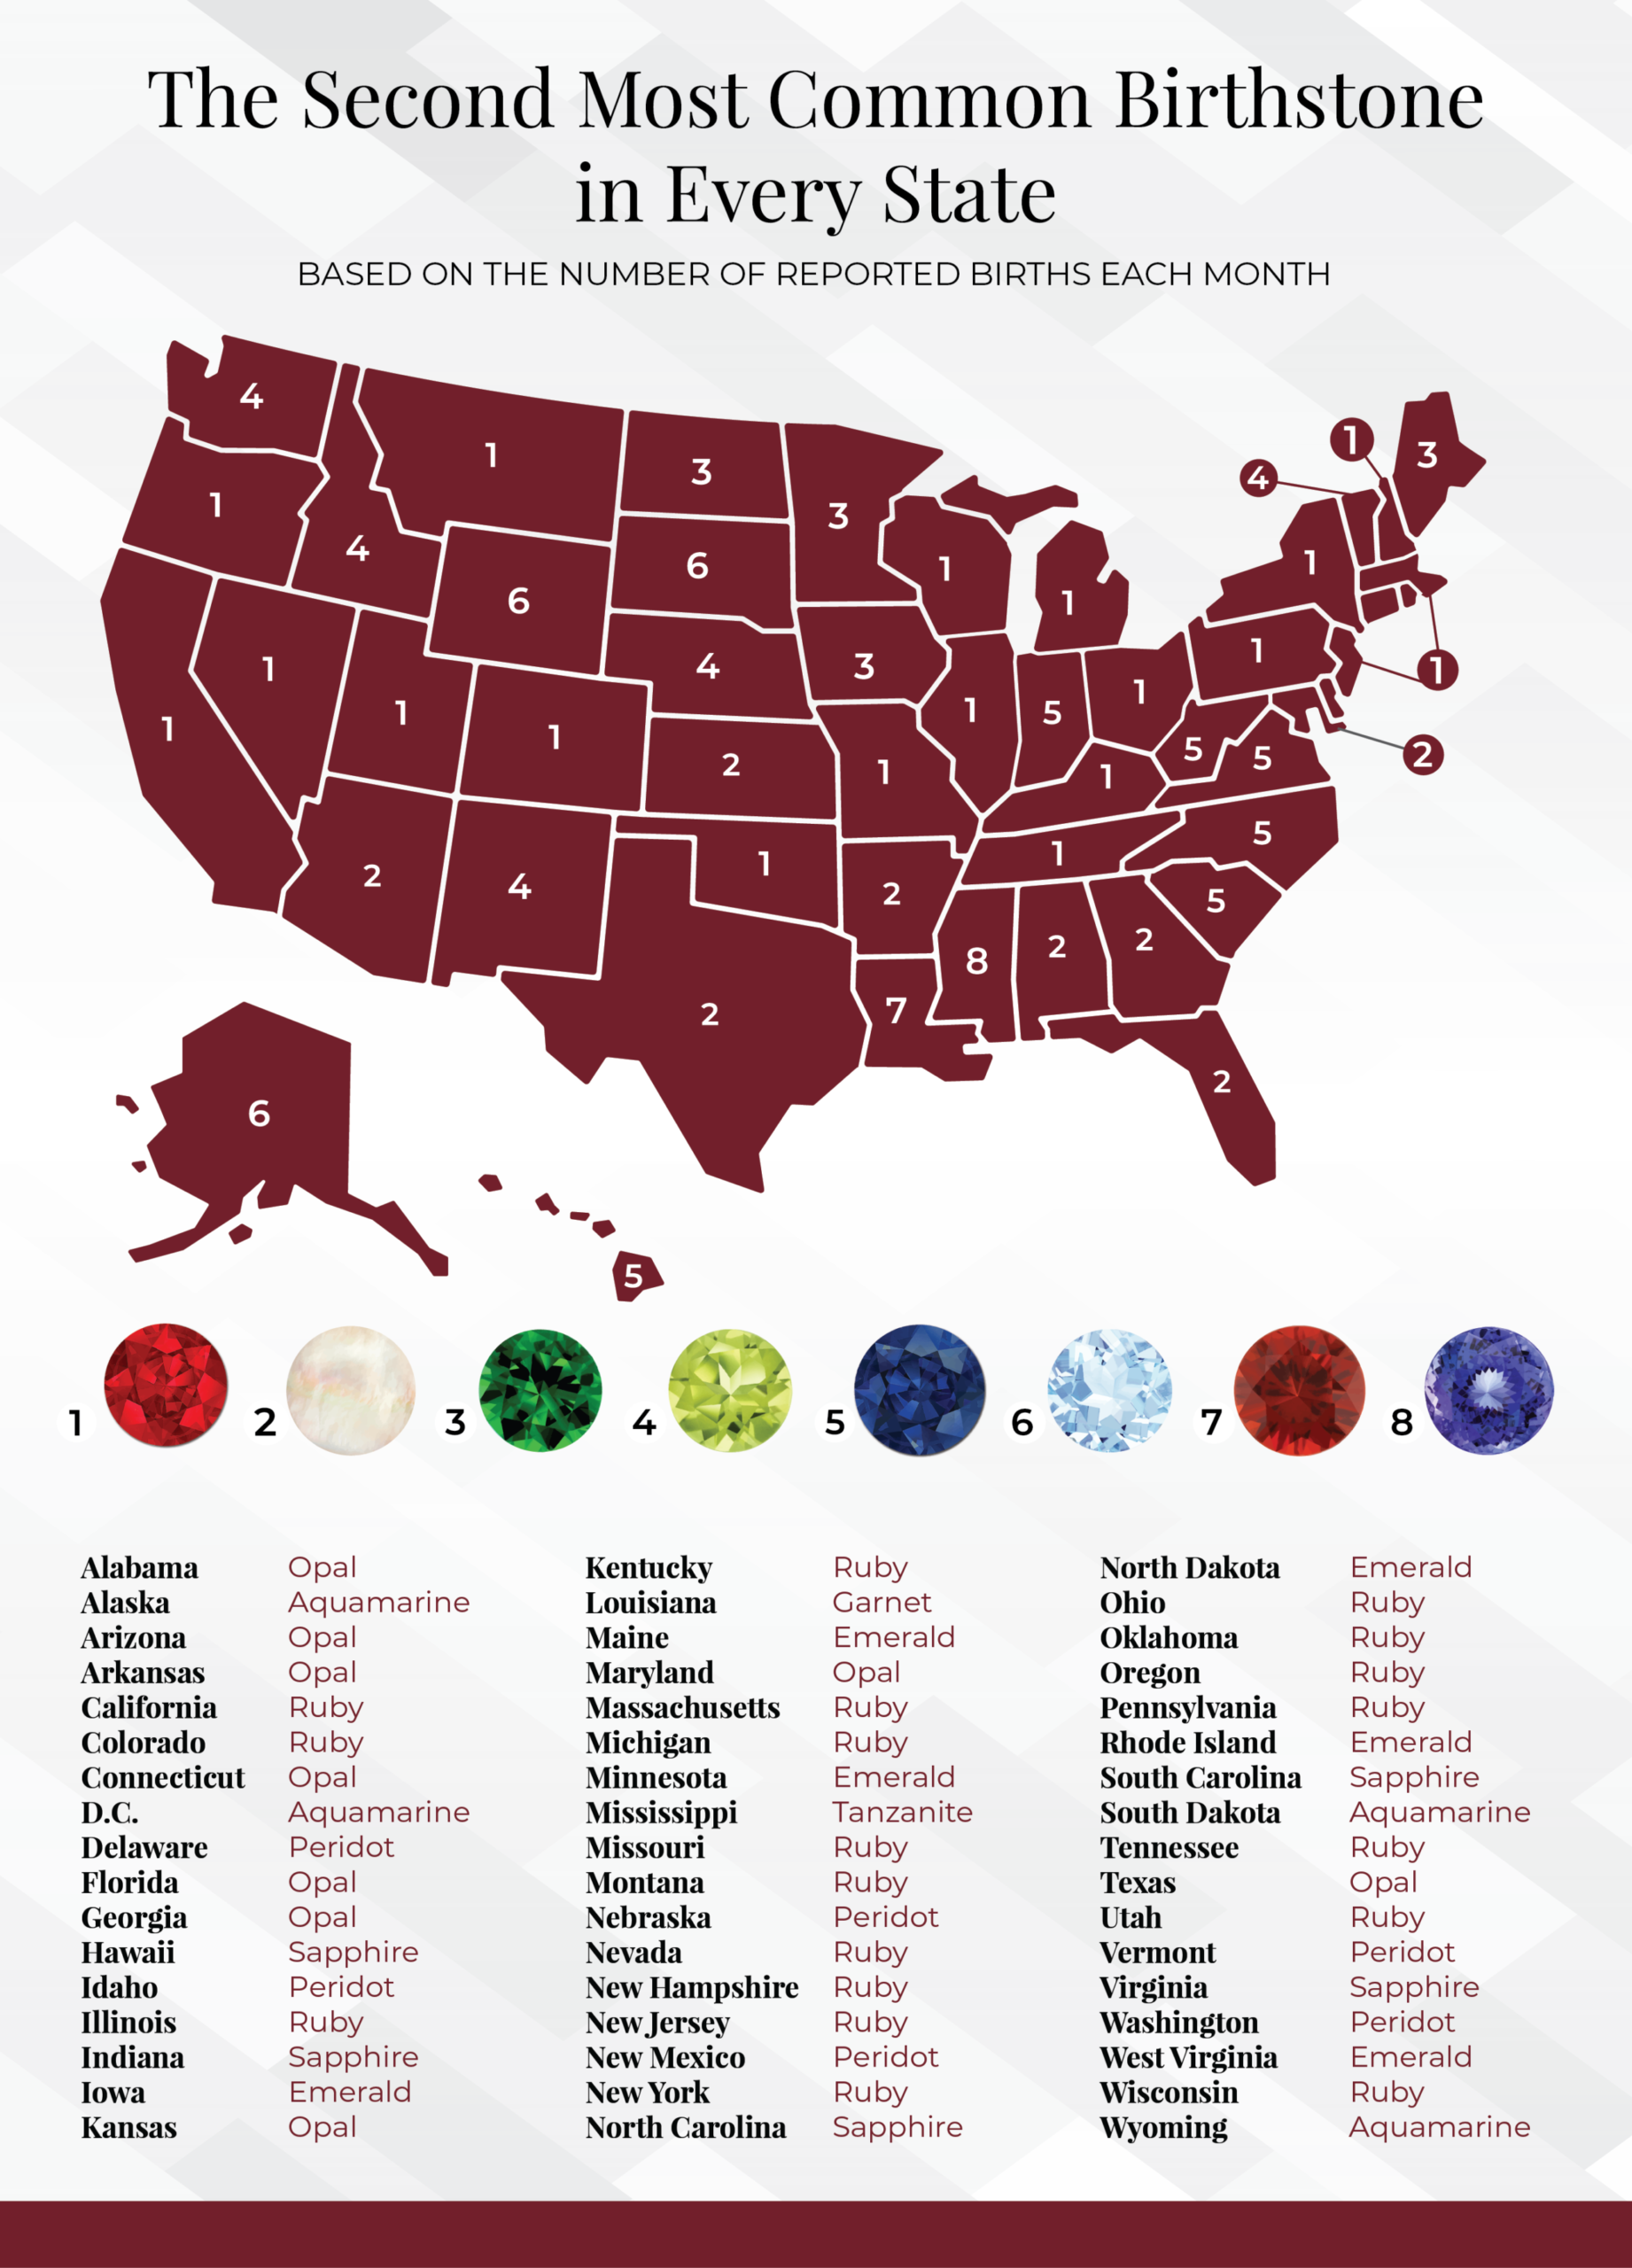 U.S. map showing the second most common birthstone in each state.